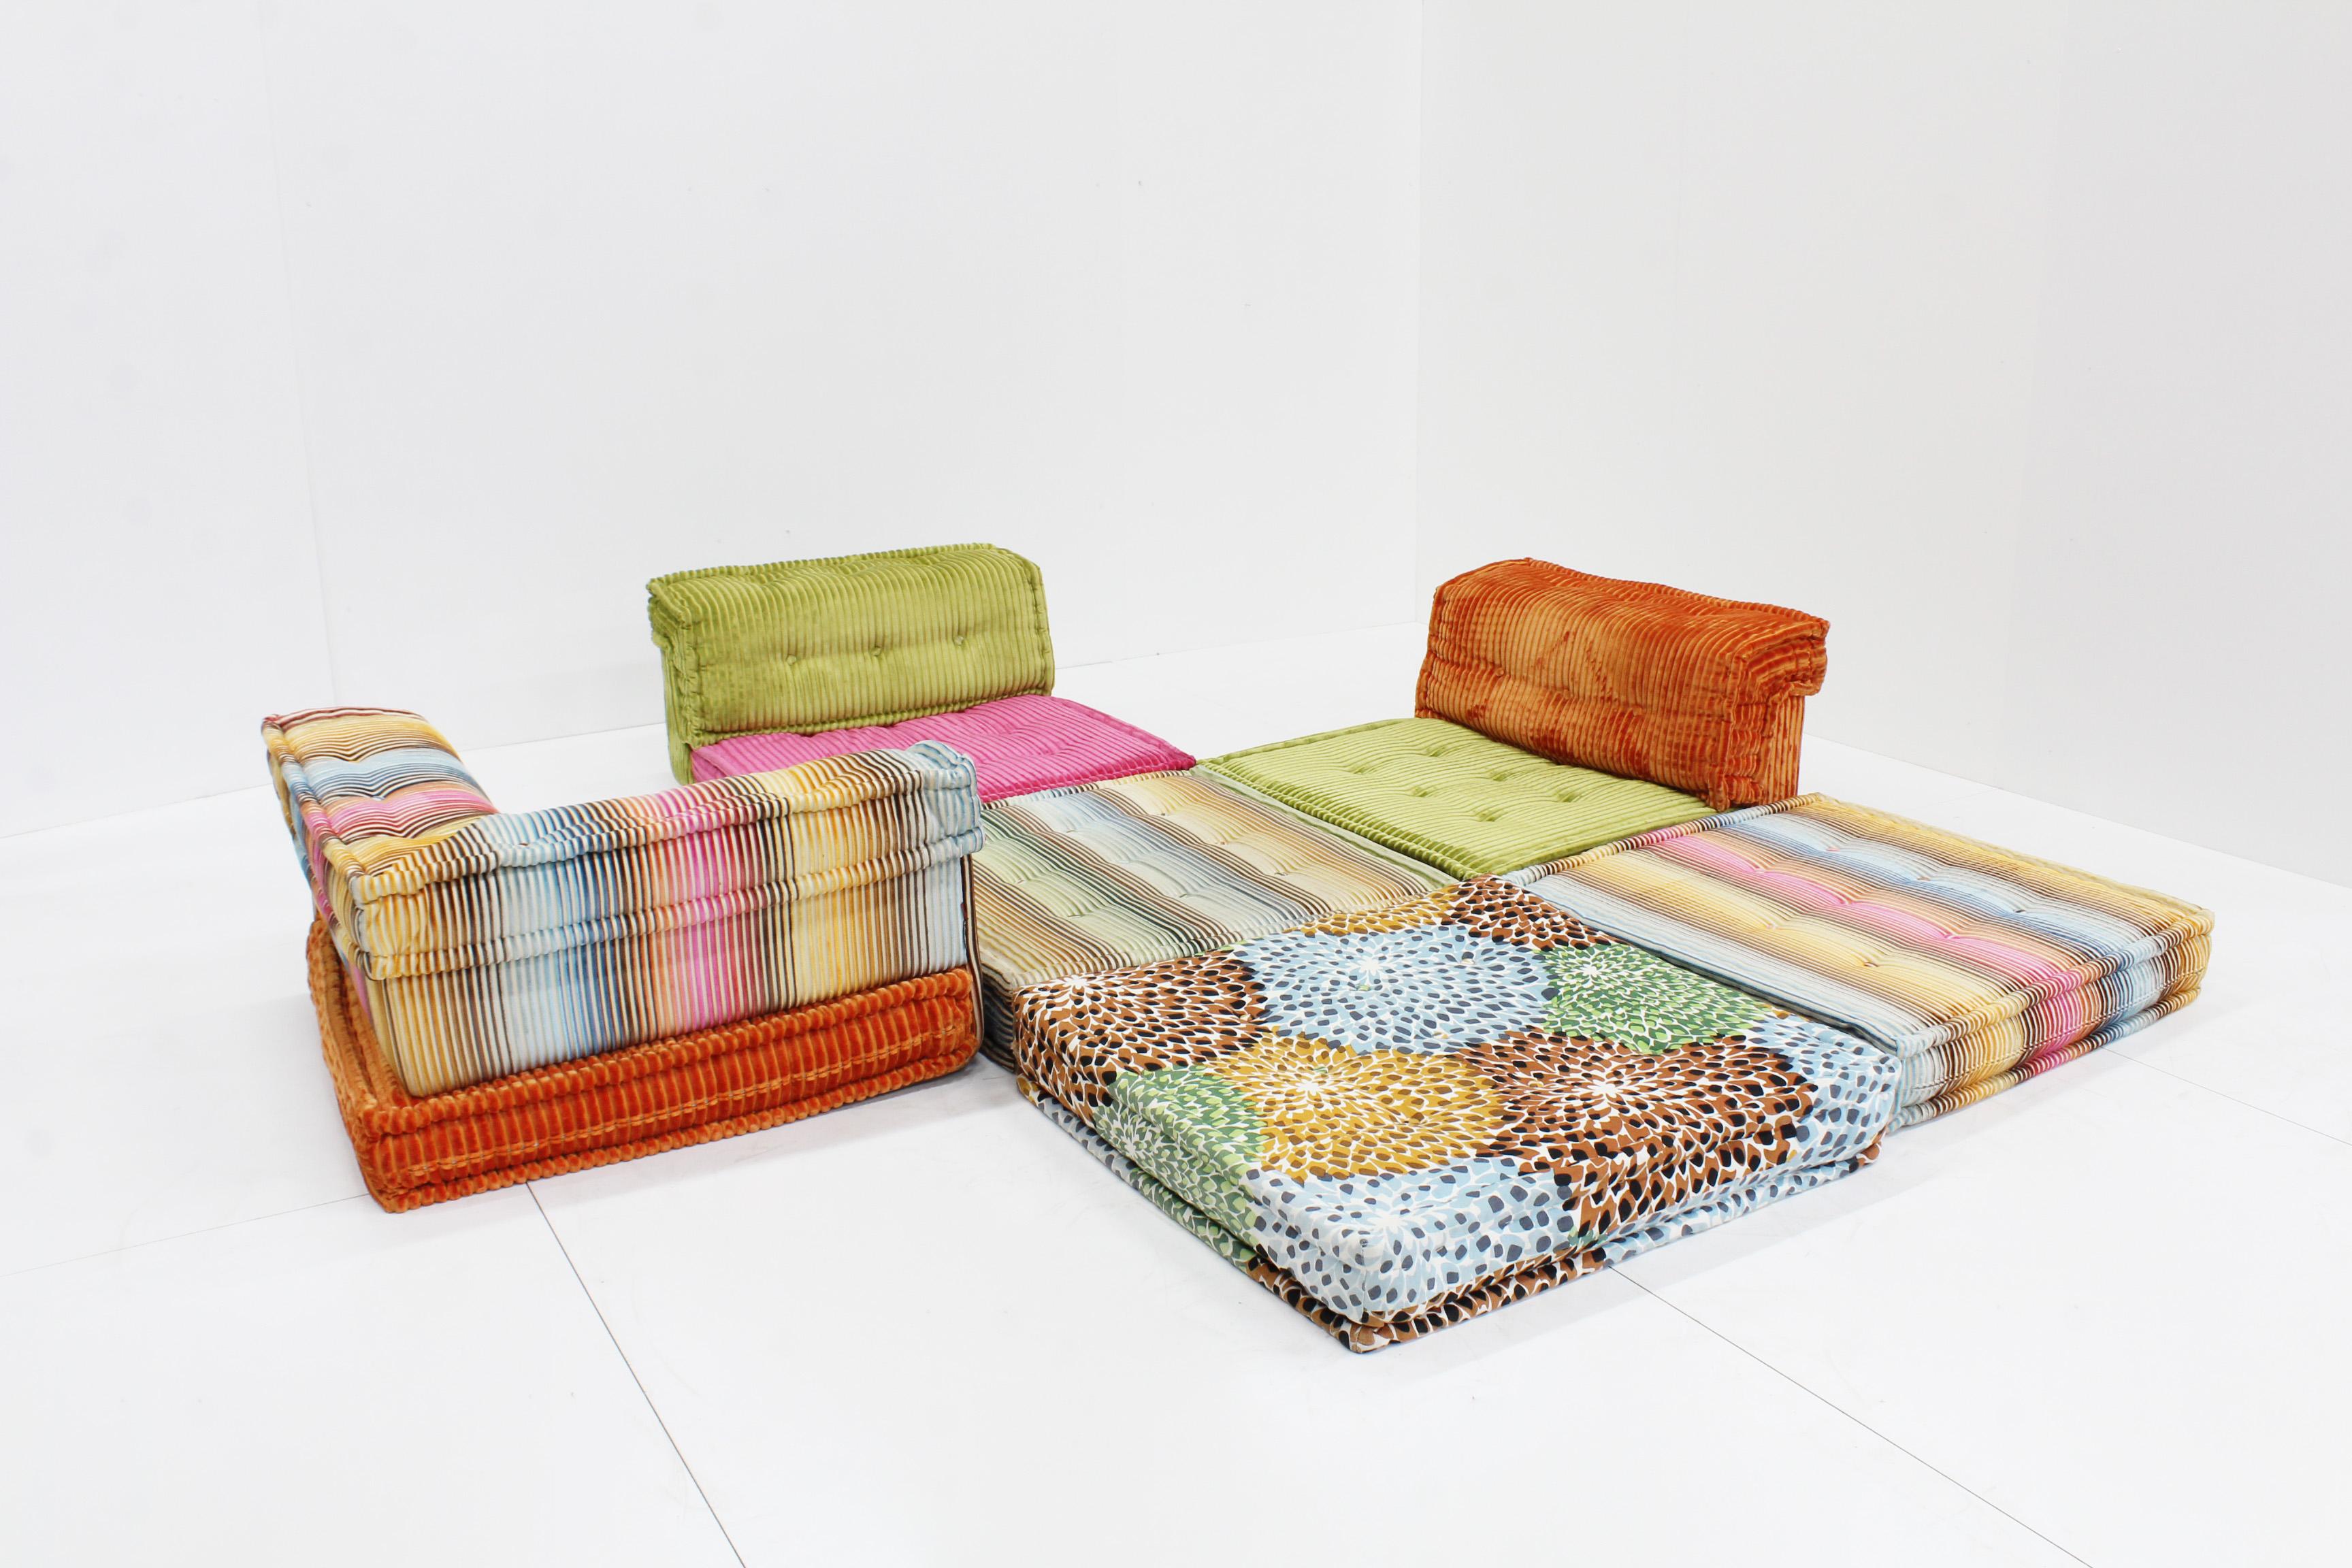 Roche Bobois Mah Jong sofa Missoni design by Hans Hopfer 
 
Roche Bobois Mah jong sofa consiting of 9 pieces in Missoni fabric designed in 1971 by Hans Hopfer. A modular design sofa with unlimited options which can be altered to your living space.